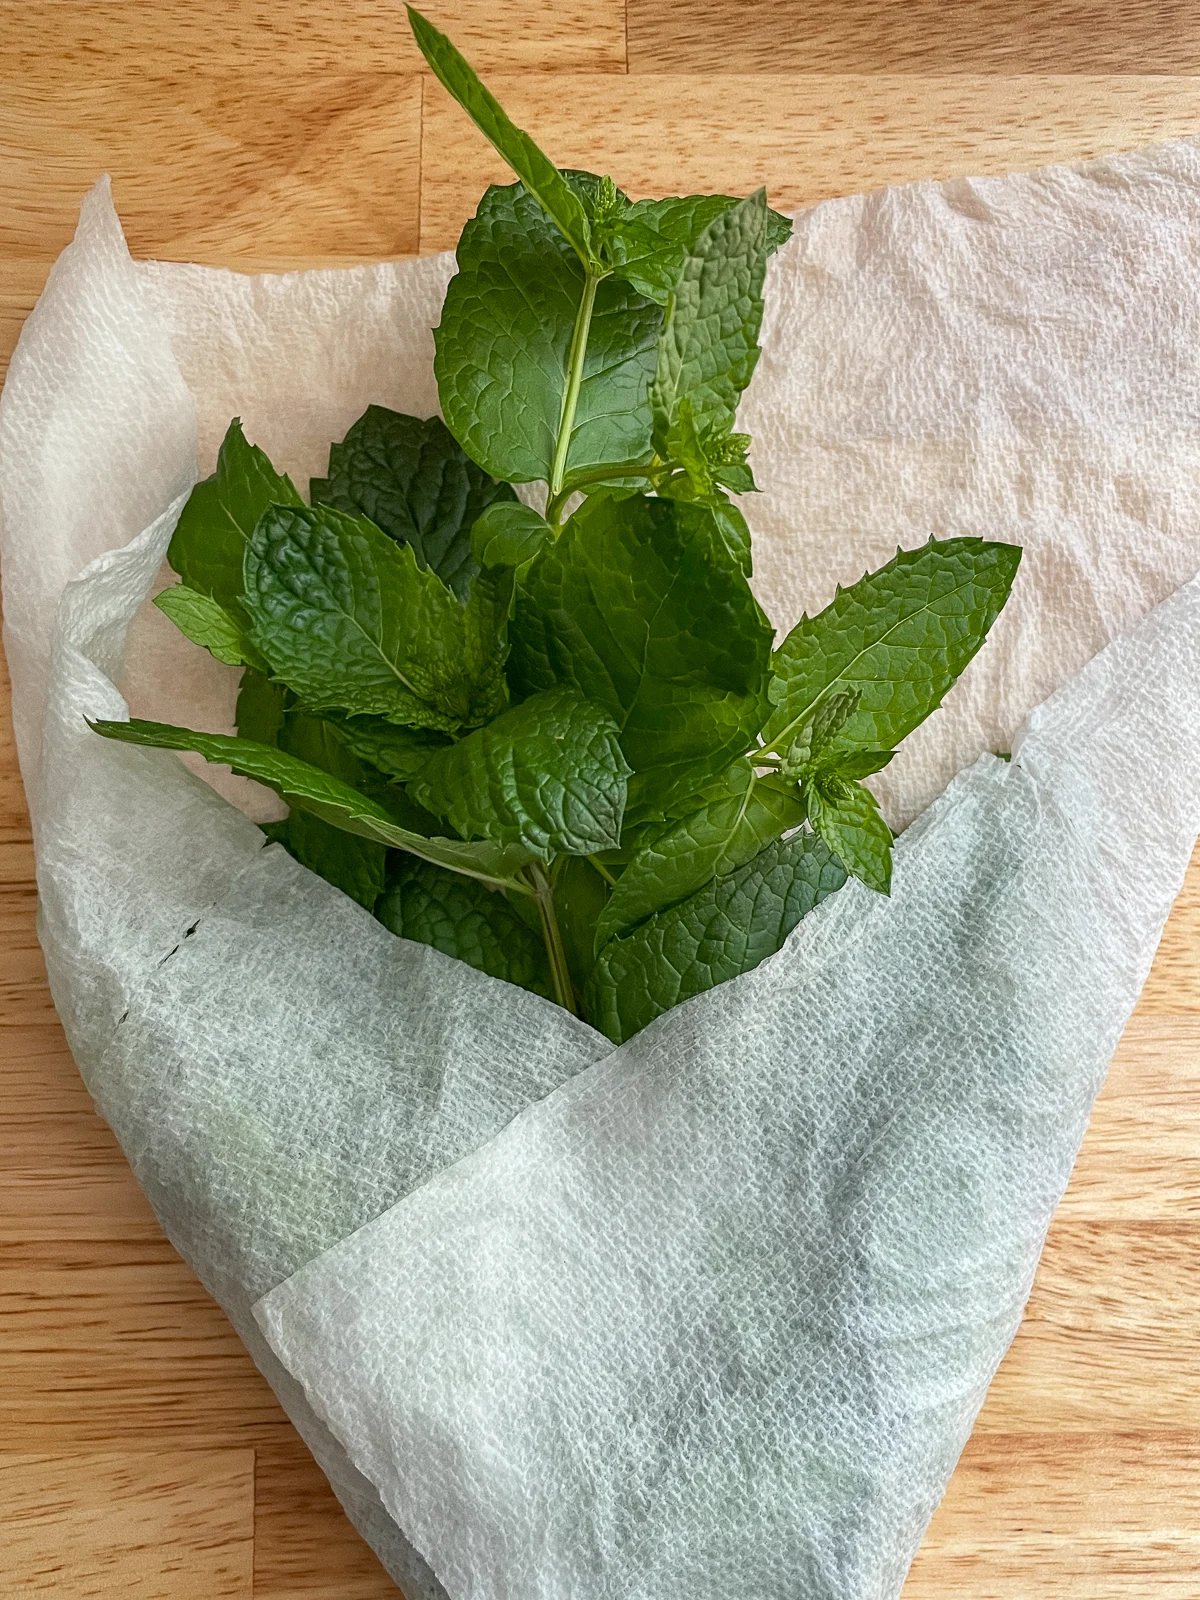 mojito mint leaves wrapped in damp paper towel for storage